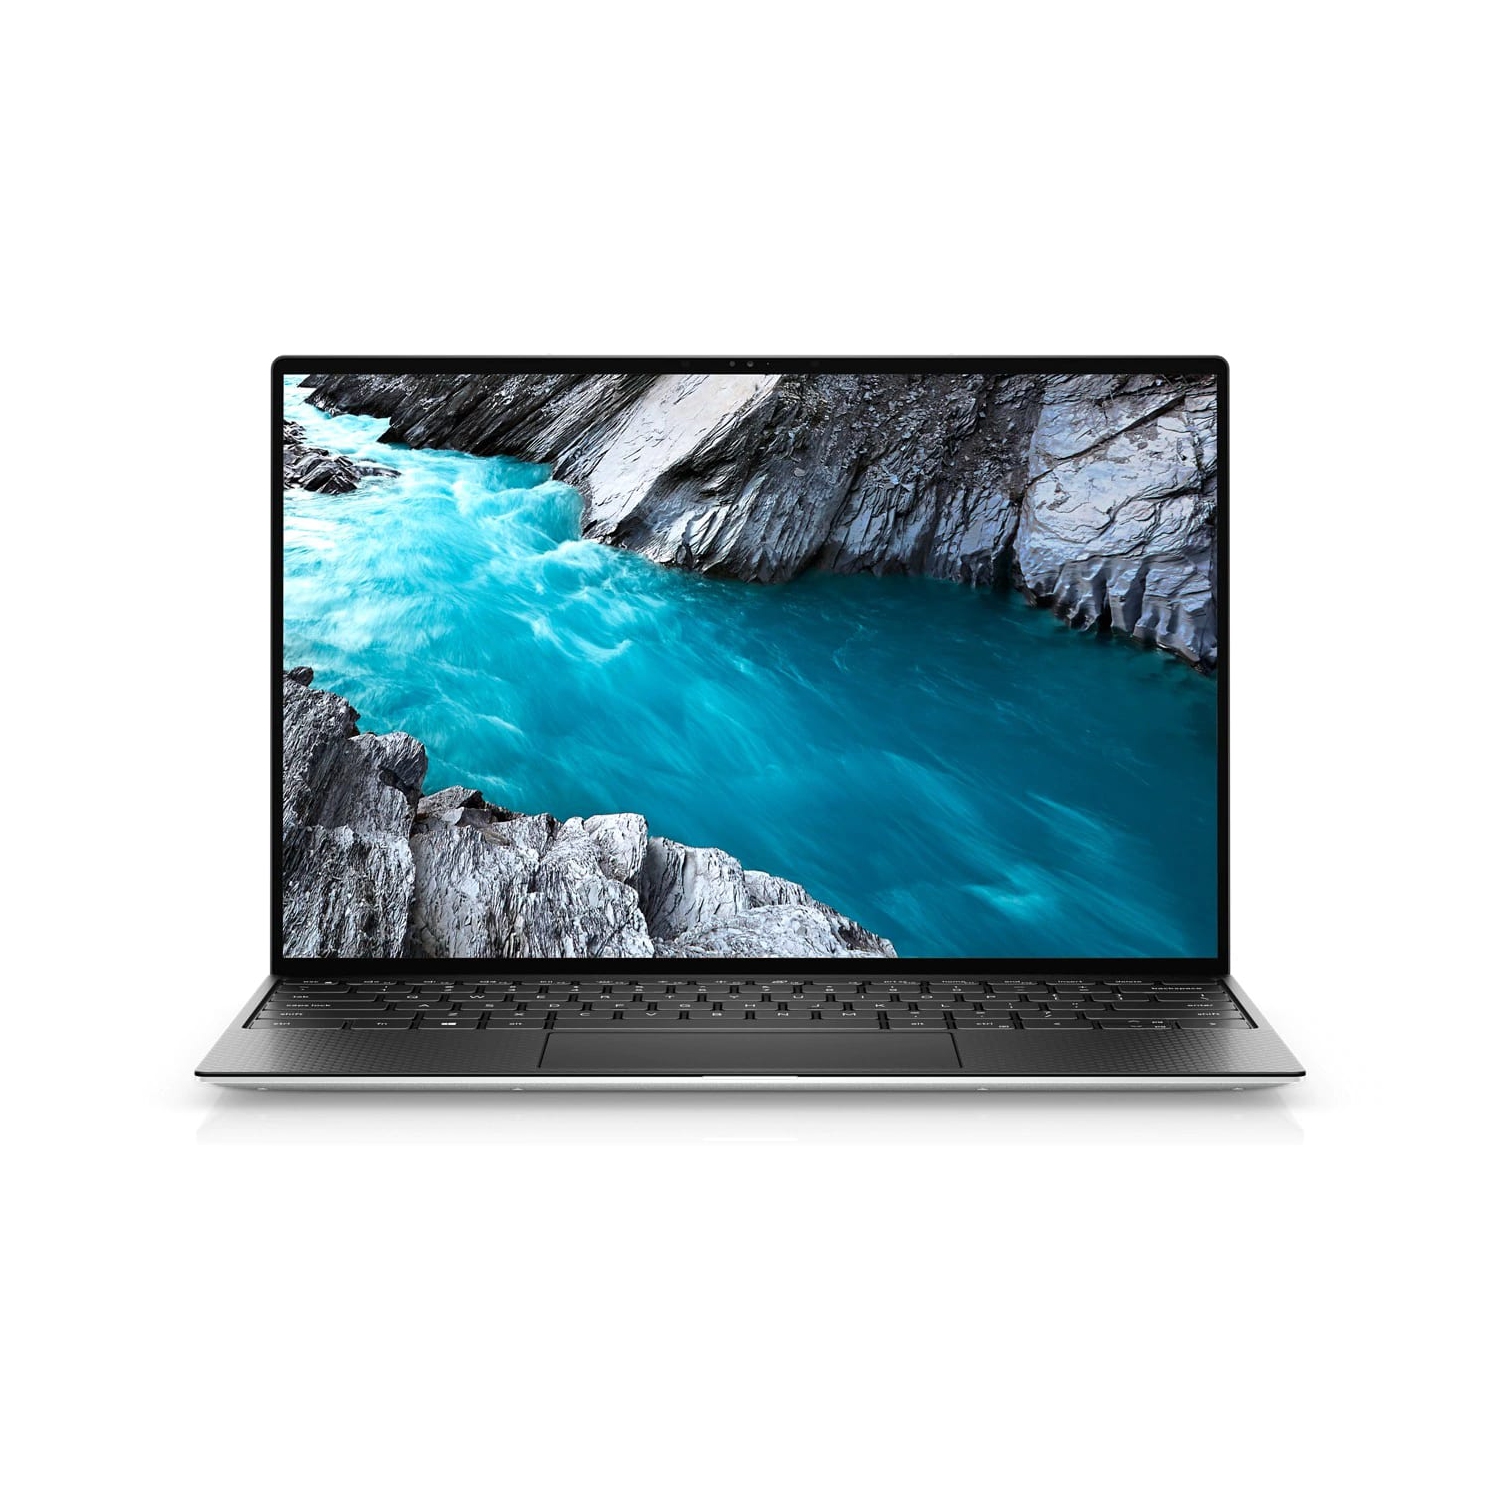 Refurbished (Excellent) - Dell XPS 13 9310 Laptop (2020) | 13.4" FHD+ | Core i5 - 1TB SSD - 8GB RAM | 4 Cores @ 4.2 GHz - 11th Gen CPU Certified Refurbished